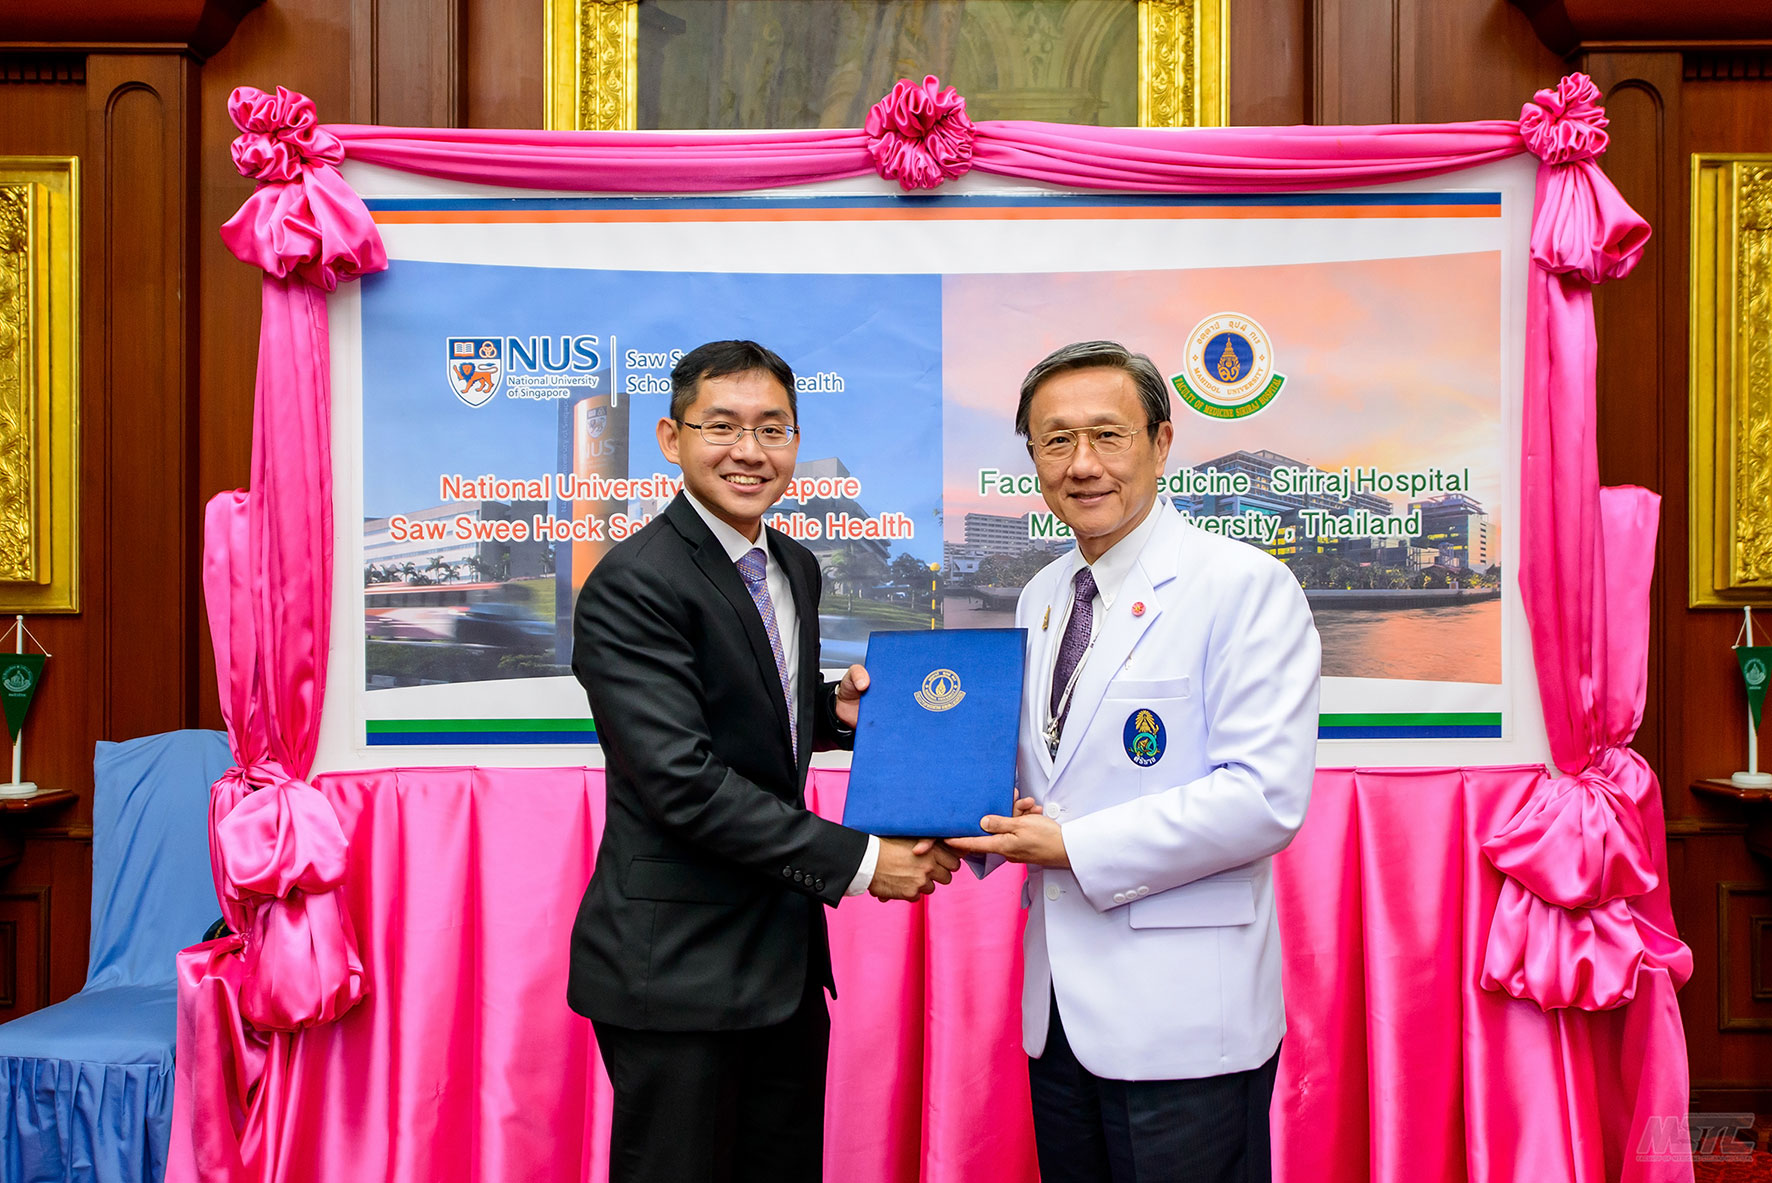 Associate Professor Teo Yik Ying, Vice Dean (Research), Saw Swee Hock School of Public Health with Prof Prasit Watanapa, Dean, Faculty of Medicine Siriraj Hospital after the signing of the MoU.